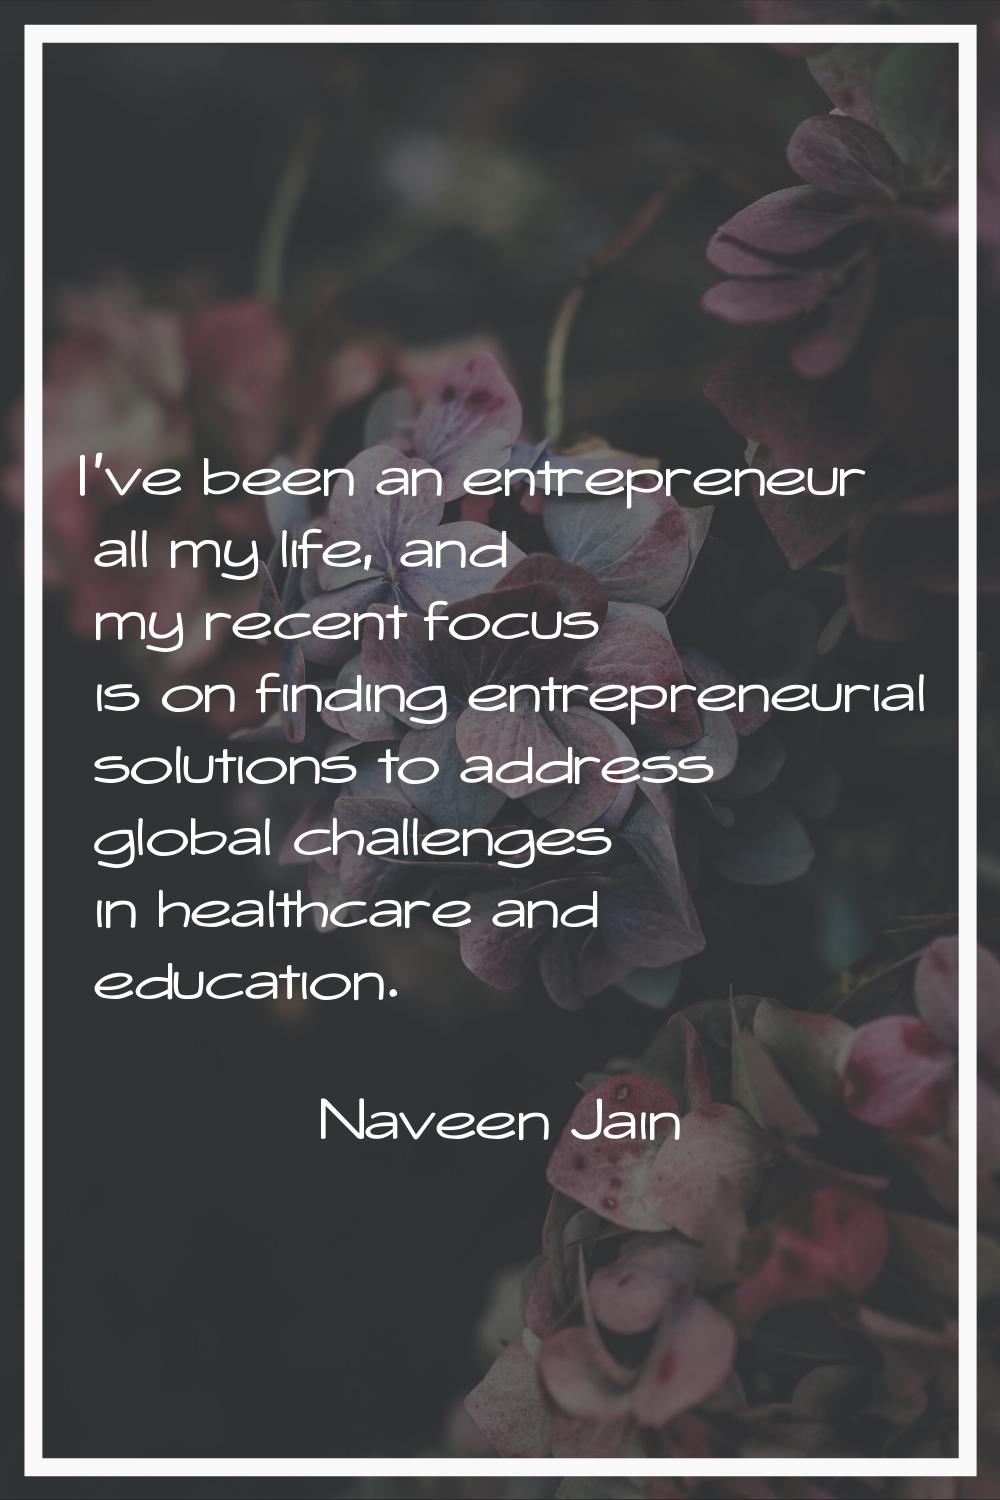 I've been an entrepreneur all my life, and my recent focus is on finding entrepreneurial solutions 